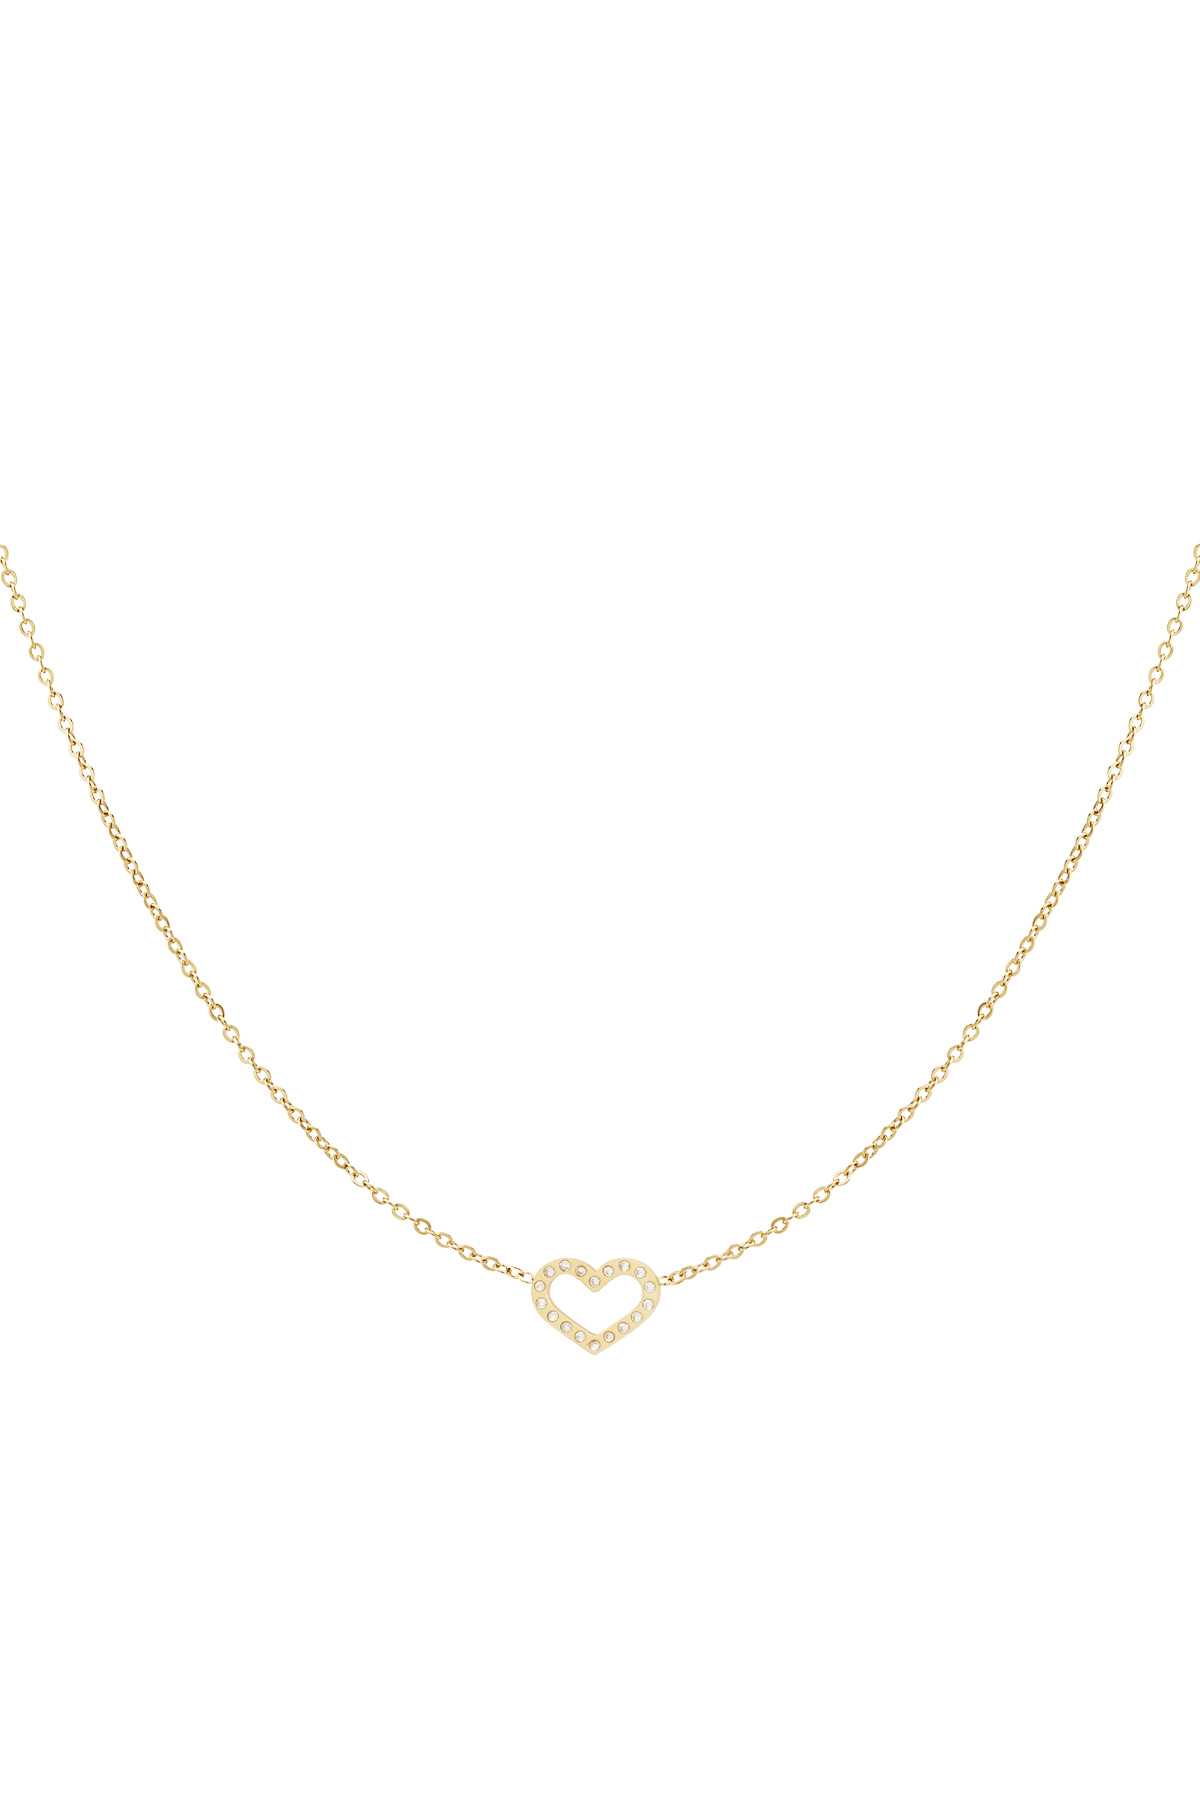 Necklace forever bond - gold h5 Picture4